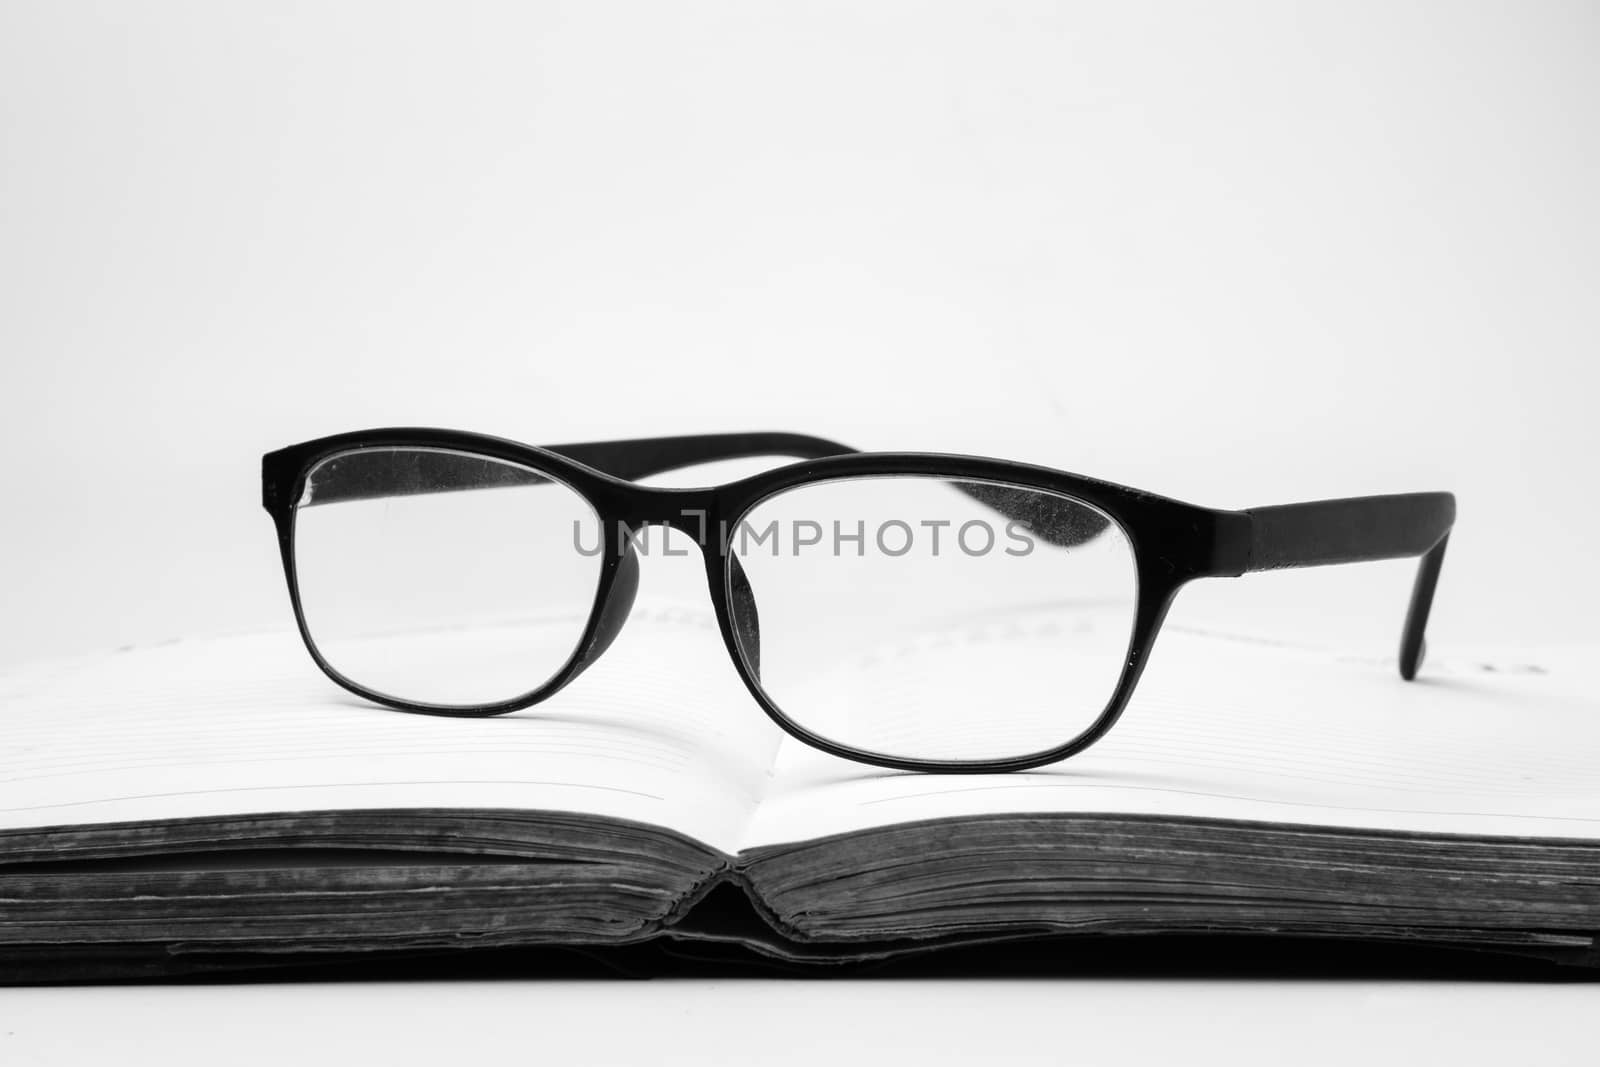 Eyeglasses on an open book, Black and White tone